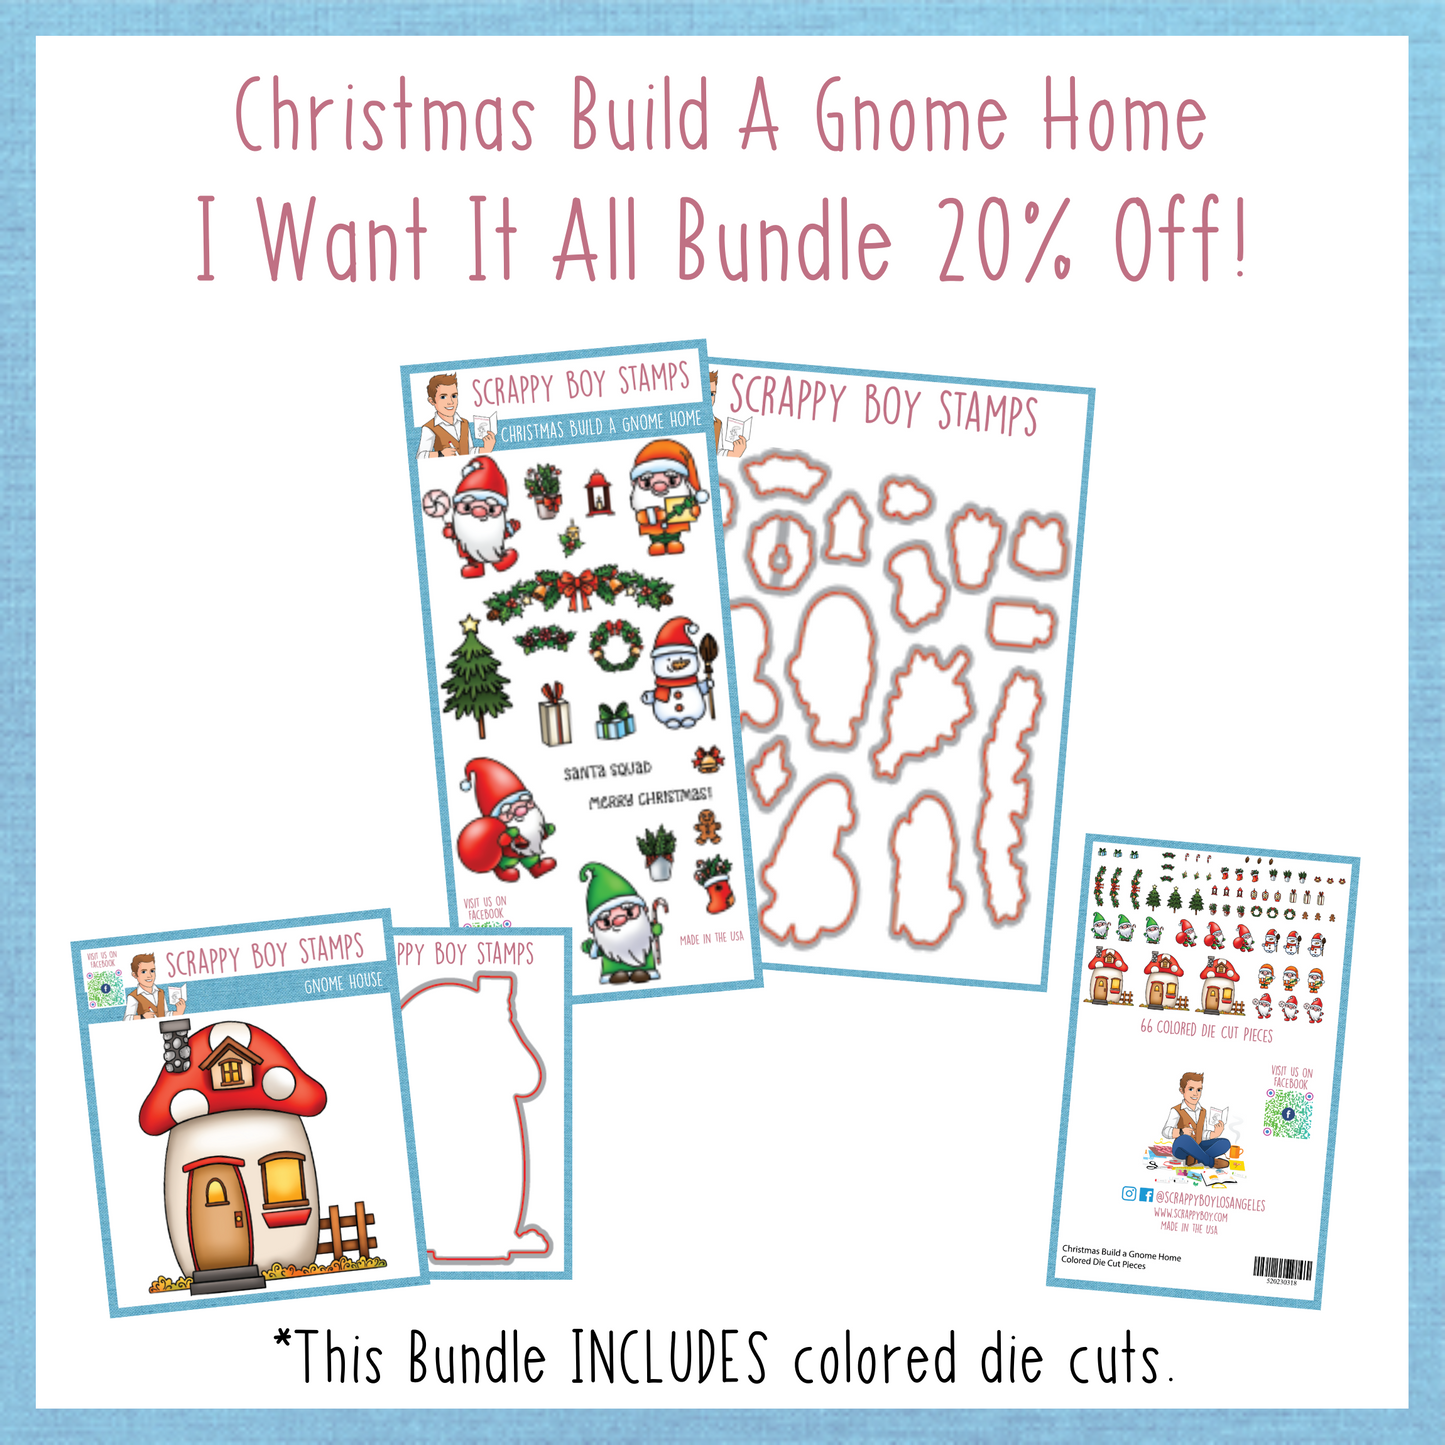 I Want It All Bundle - Christmas Build A Gnome Home Release Scrappy Boy Stamps